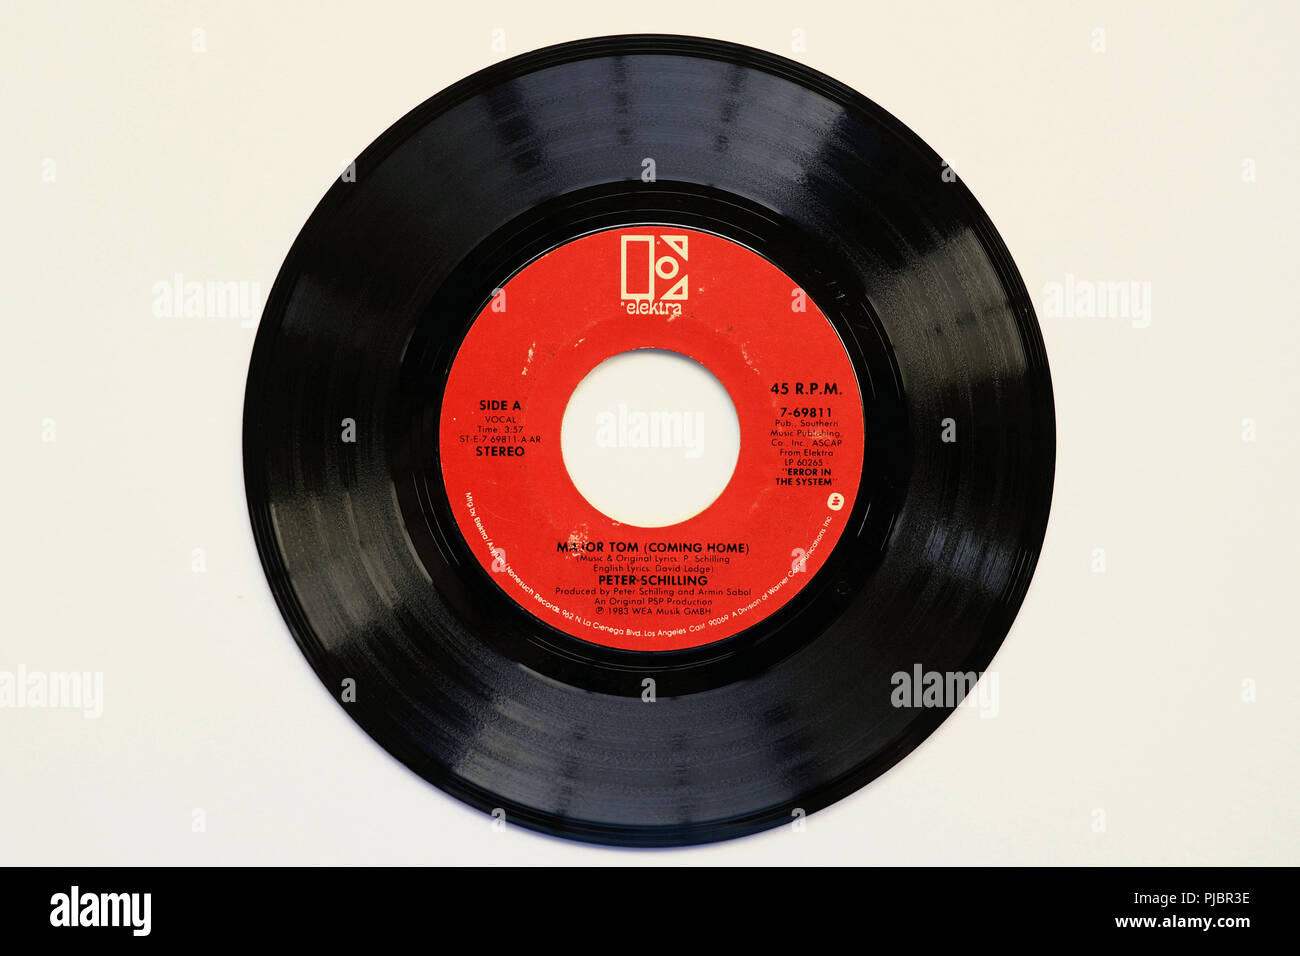 45 Rpm Vinyl Record Of Peter Schilling S Song Major Tom Coming Home Released In 19 By Elektra Records In The U S Stock Photo Alamy